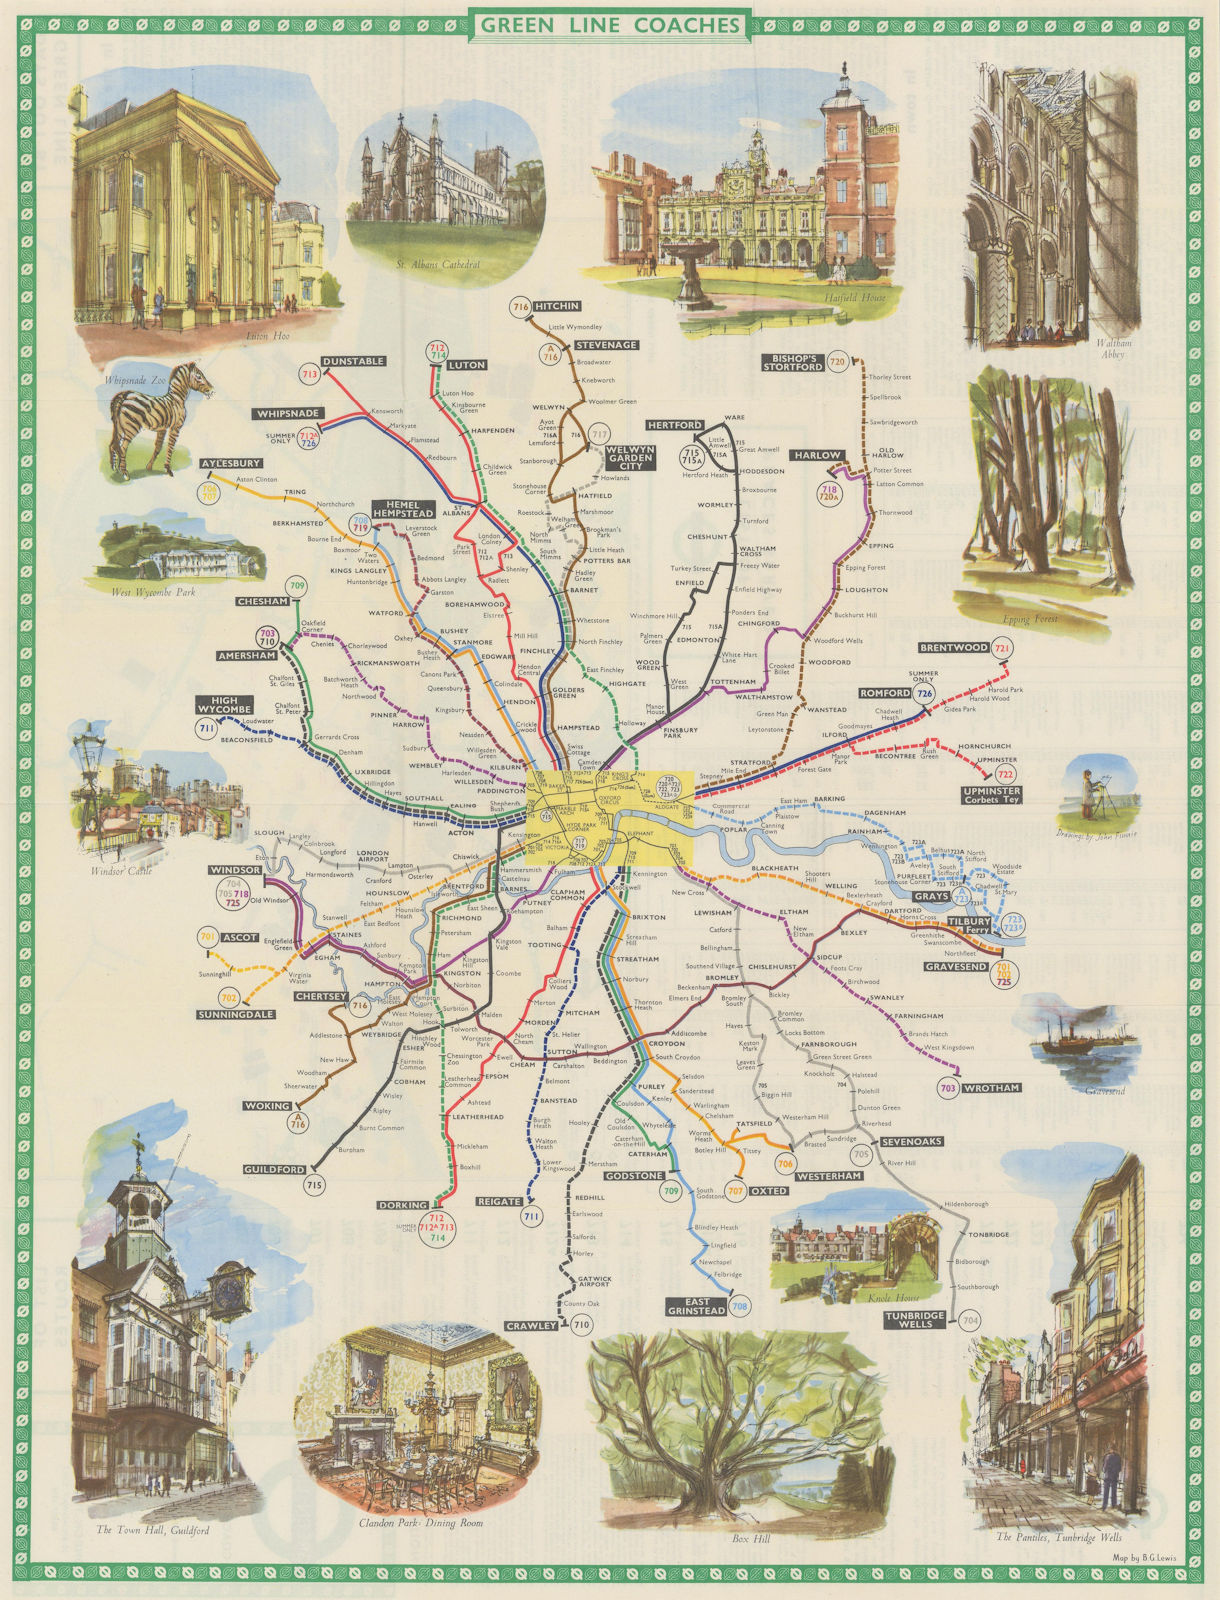 London Transport Green Line Coach Routes. LEWIS #1 1963 old vintage map chart